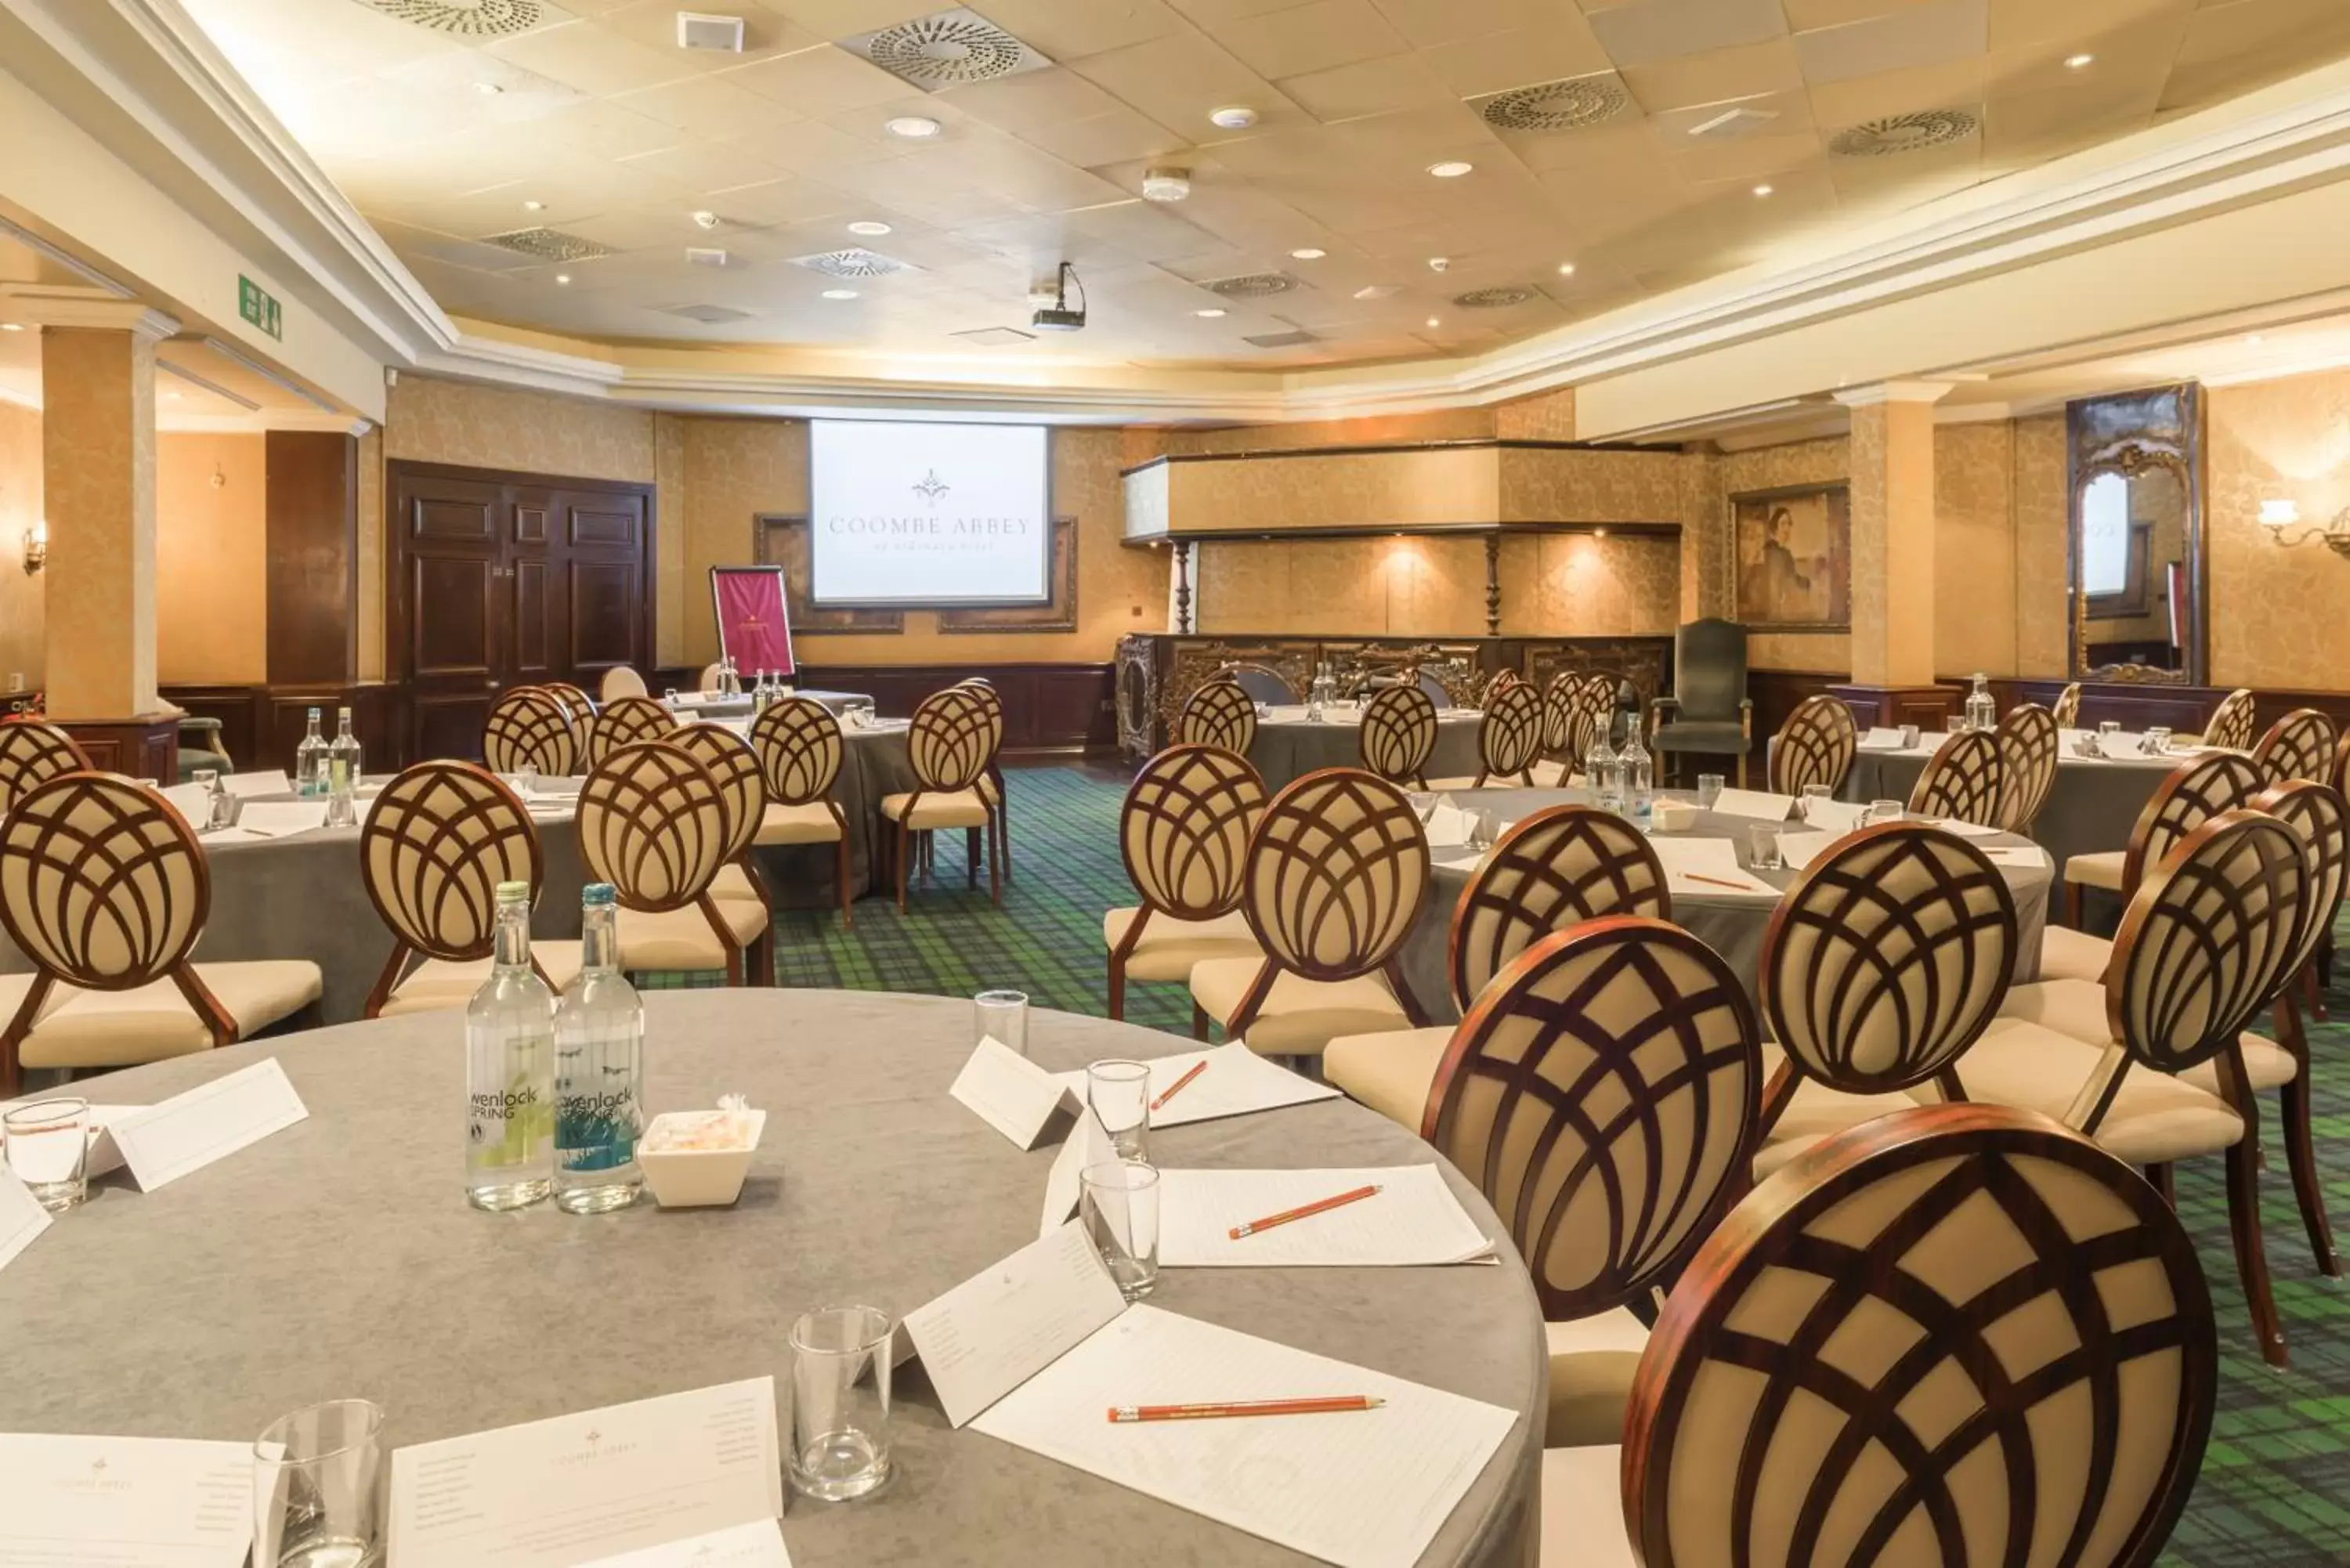 Meeting/conference room, Restaurant/Places to Eat in Coombe Abbey Hotel